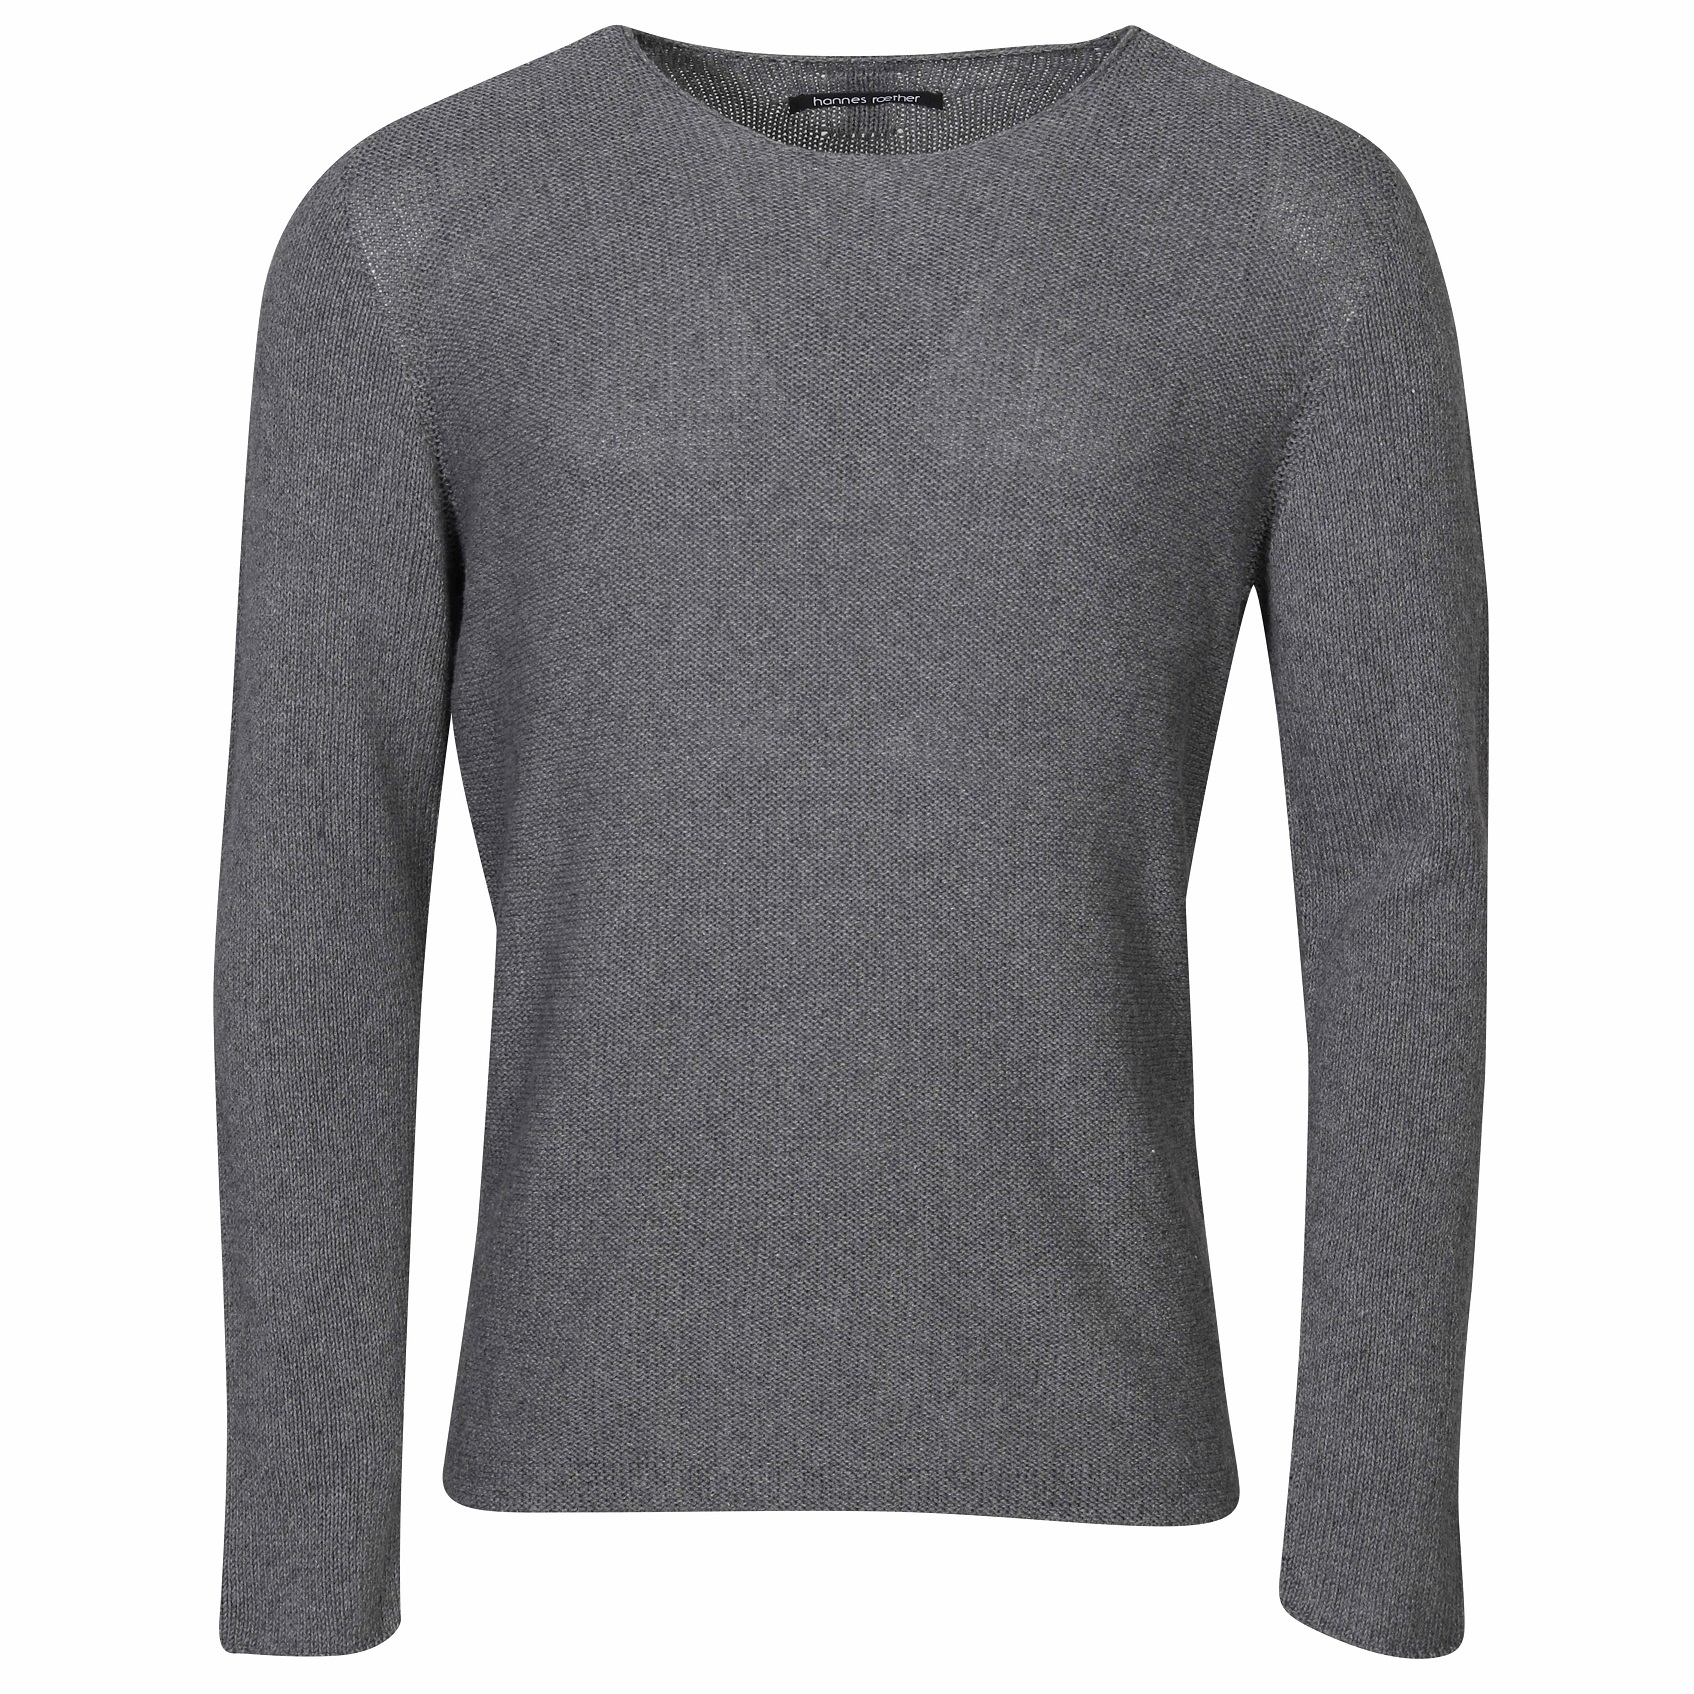 HANNES ROETHER Knit Sweater in Grey L